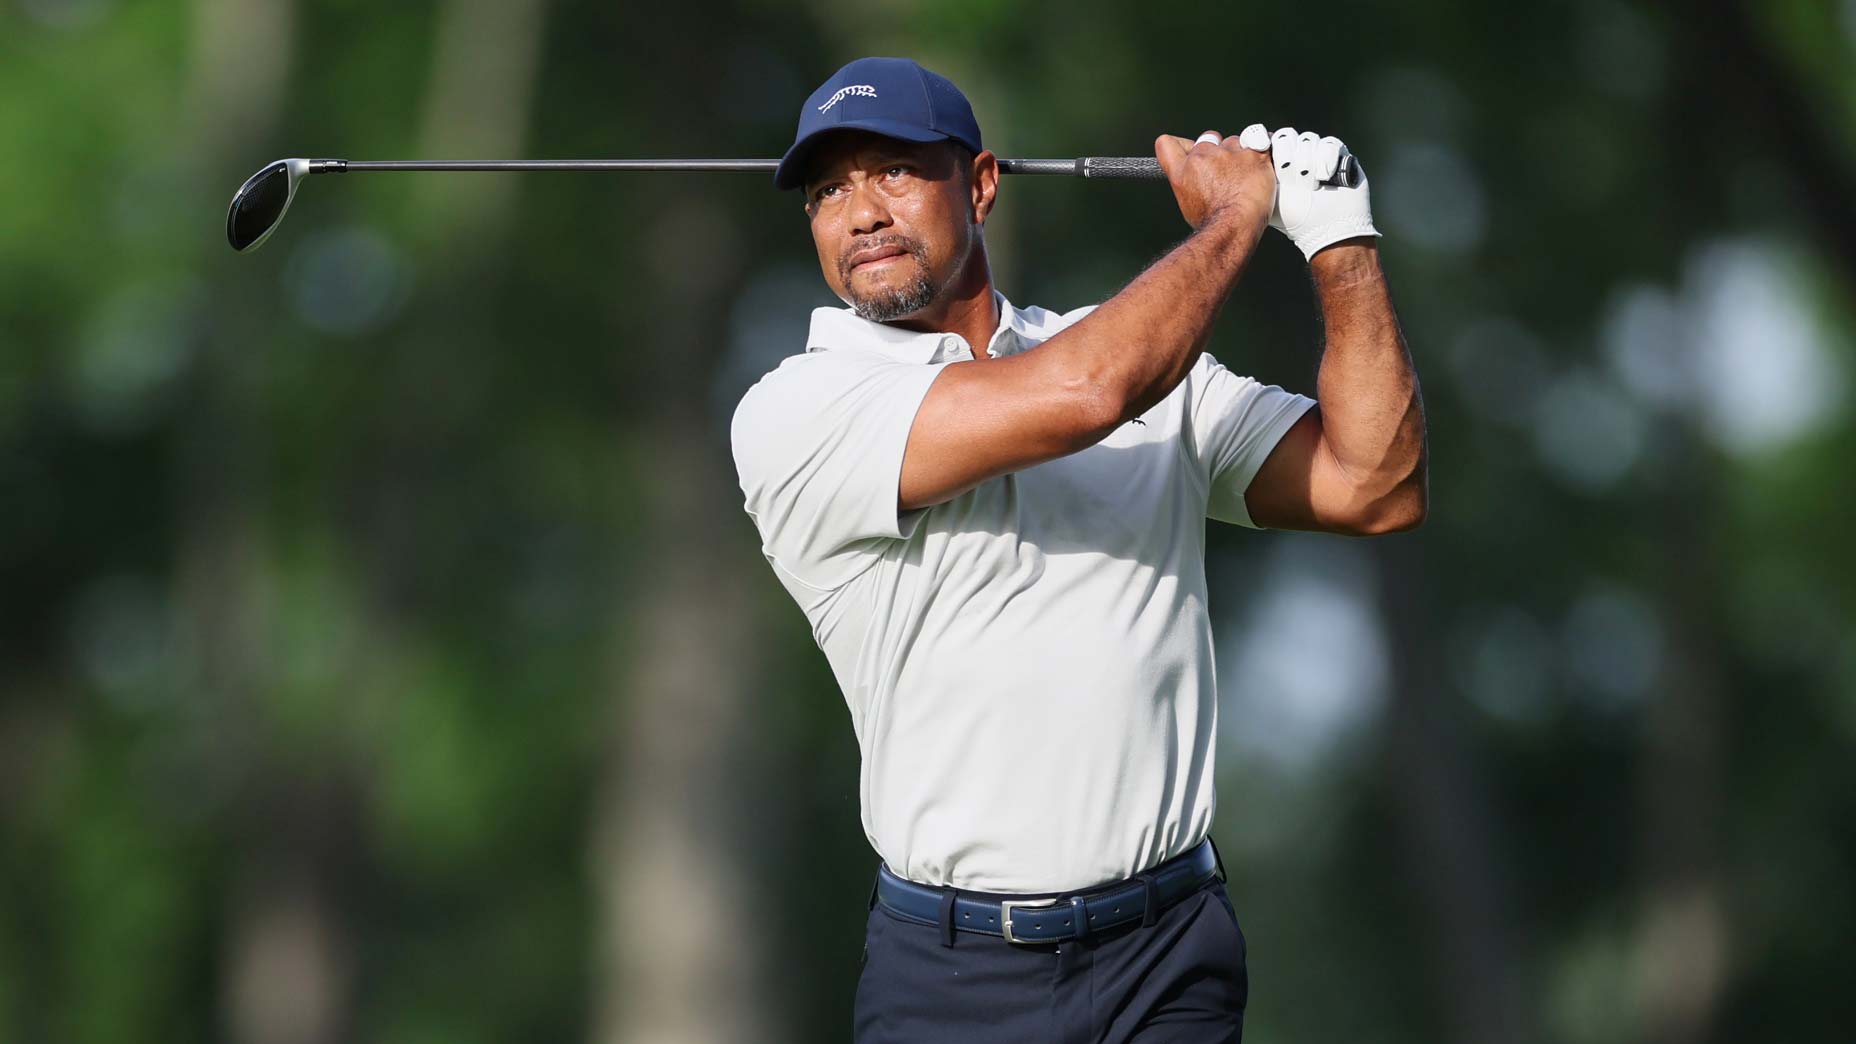 Tiger Woods in white shirt hits shot during practice at Valhalla for 2024 PGA Championship